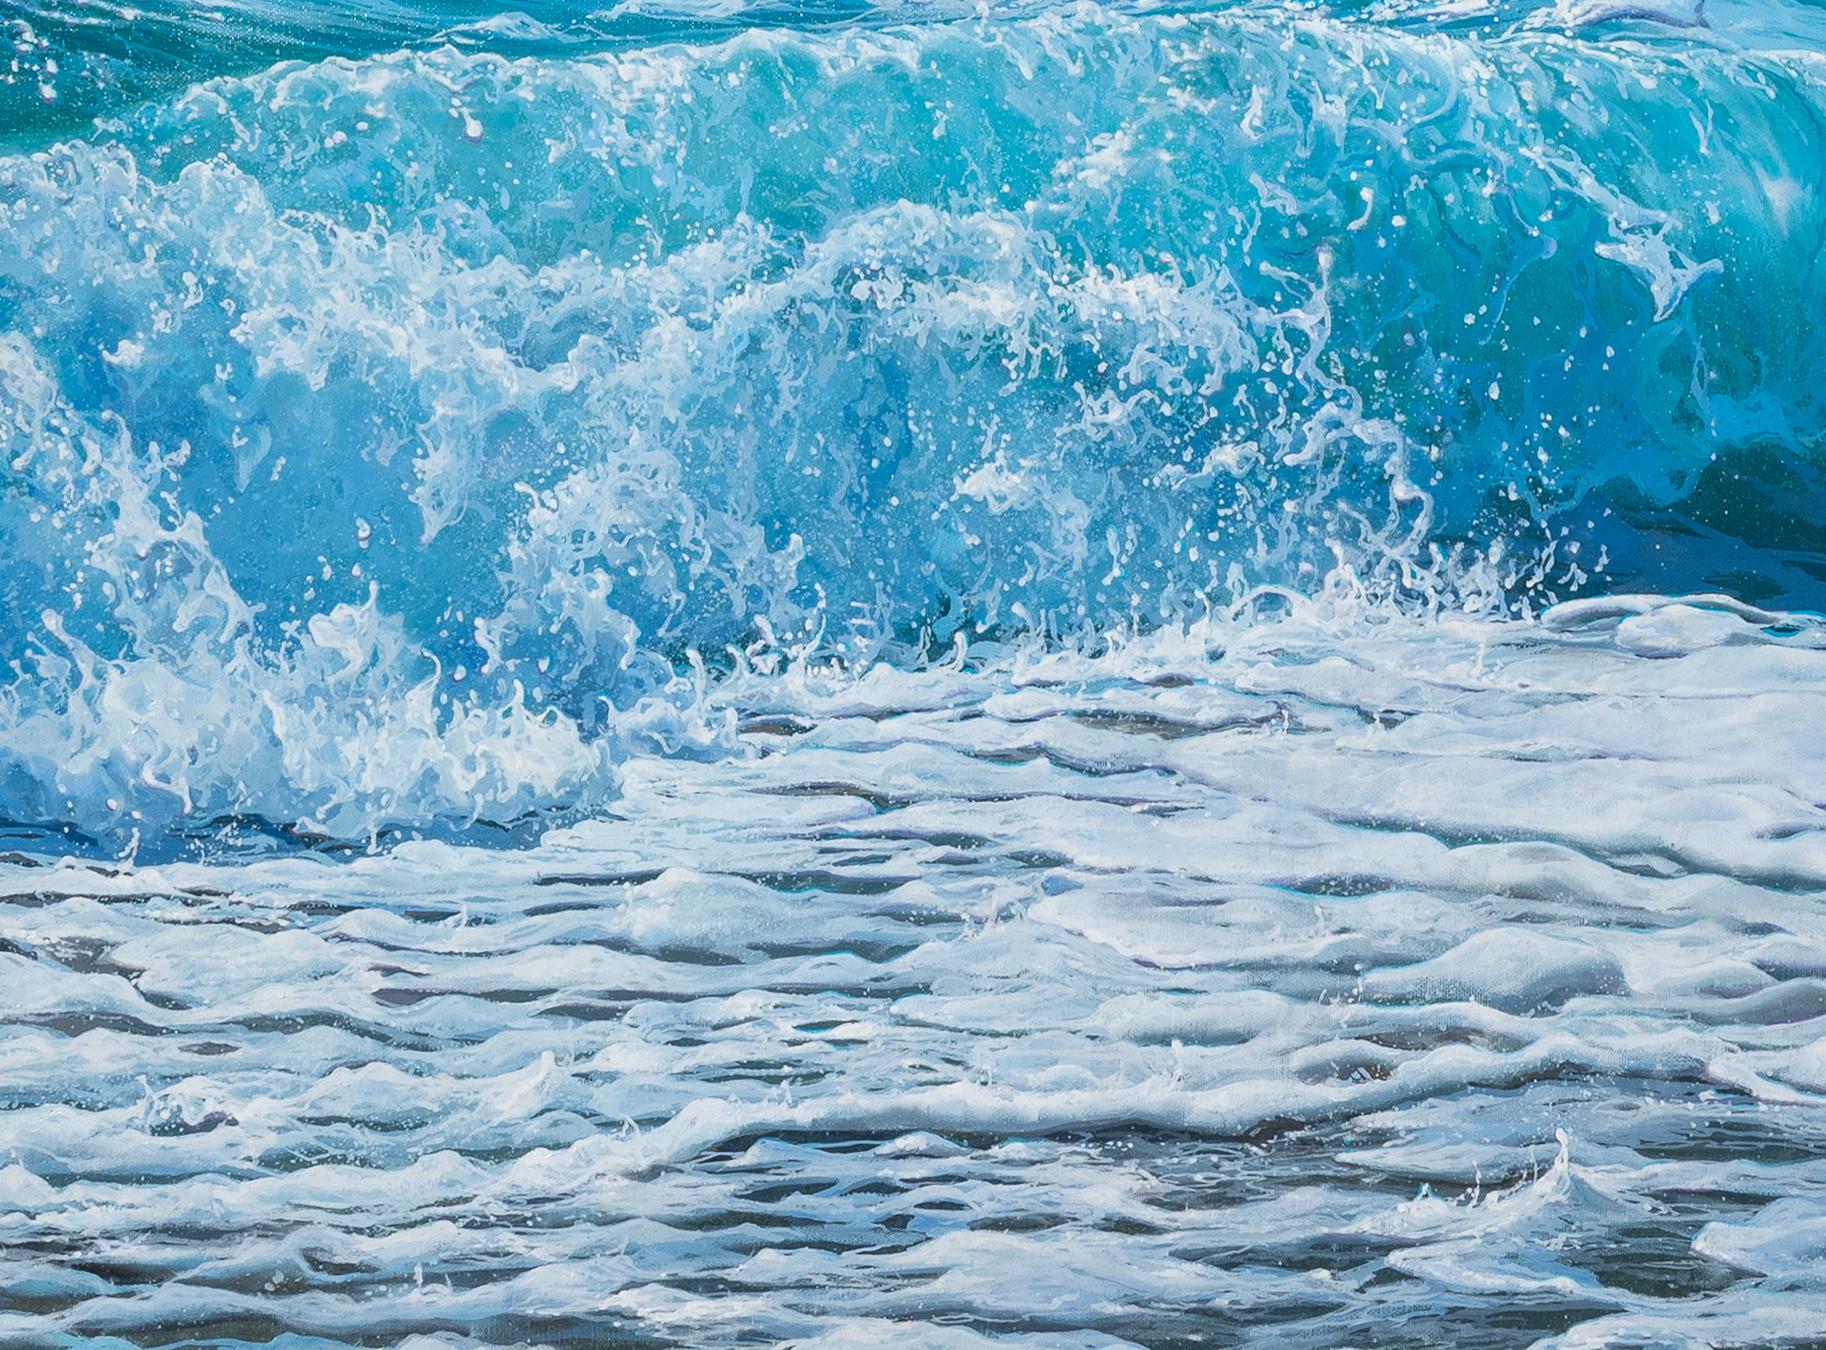 'Sparkling Crest' is a realist Contemporary Seascape Painting by Marc Esteve. Sea, sand and waves make for a composition that is beautiful and tranquil. You can hear the rolling waves and smell the salty air!

Sometimes you have to pause to realise